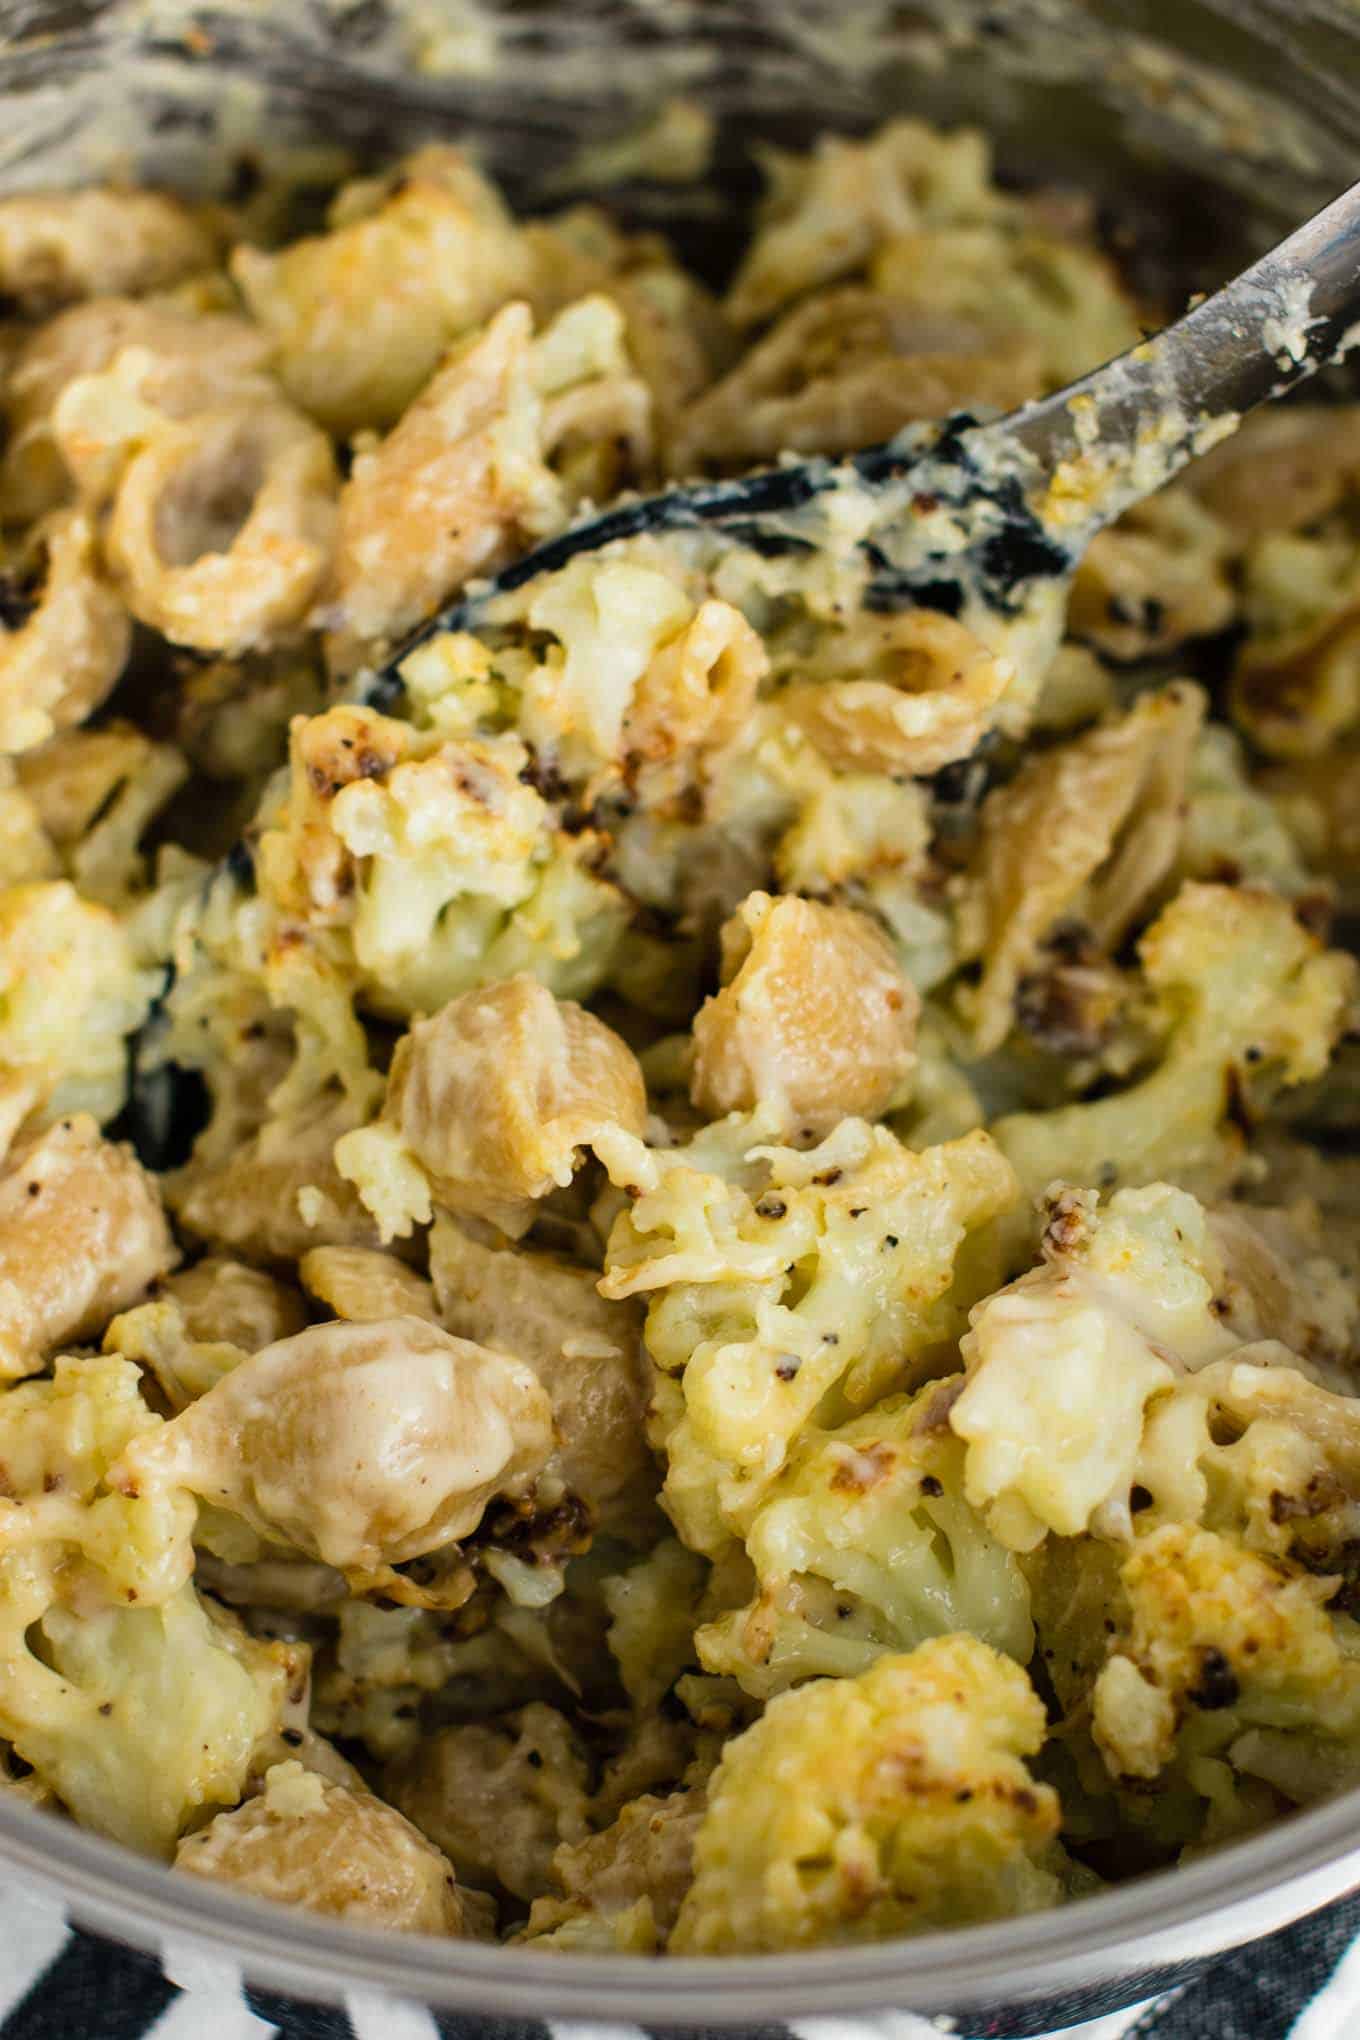 Roasted cauliflower shells and cheese - this was AMAZING. I could eat this every night! #vegetarian #pasta #cauliflower #shellsandcheese #vegetarian #dinner